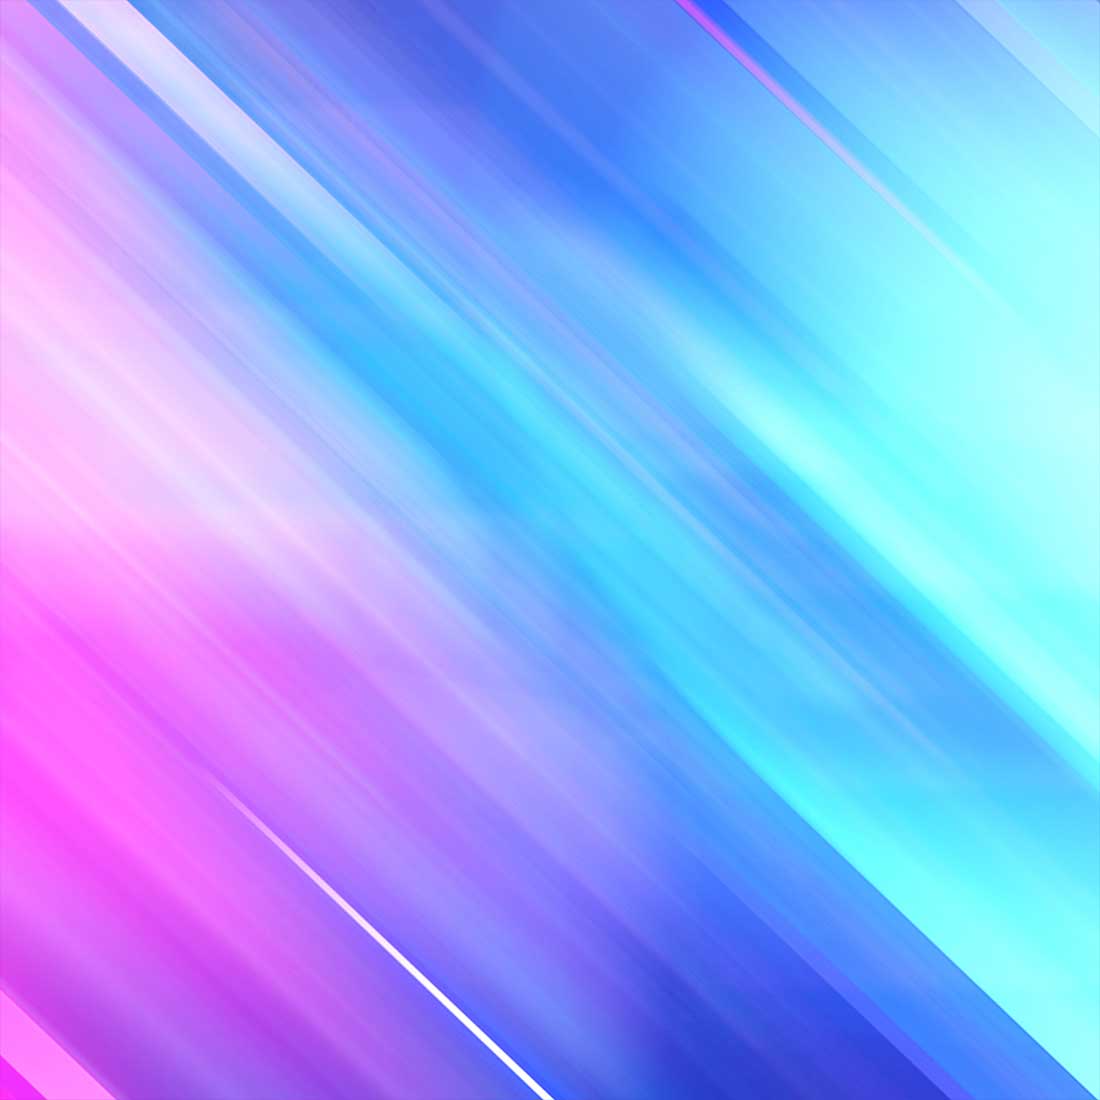 Abstract Gradient Background Luxury Vivid Blurred Colorful Texture Wallpaper Photo cover image.